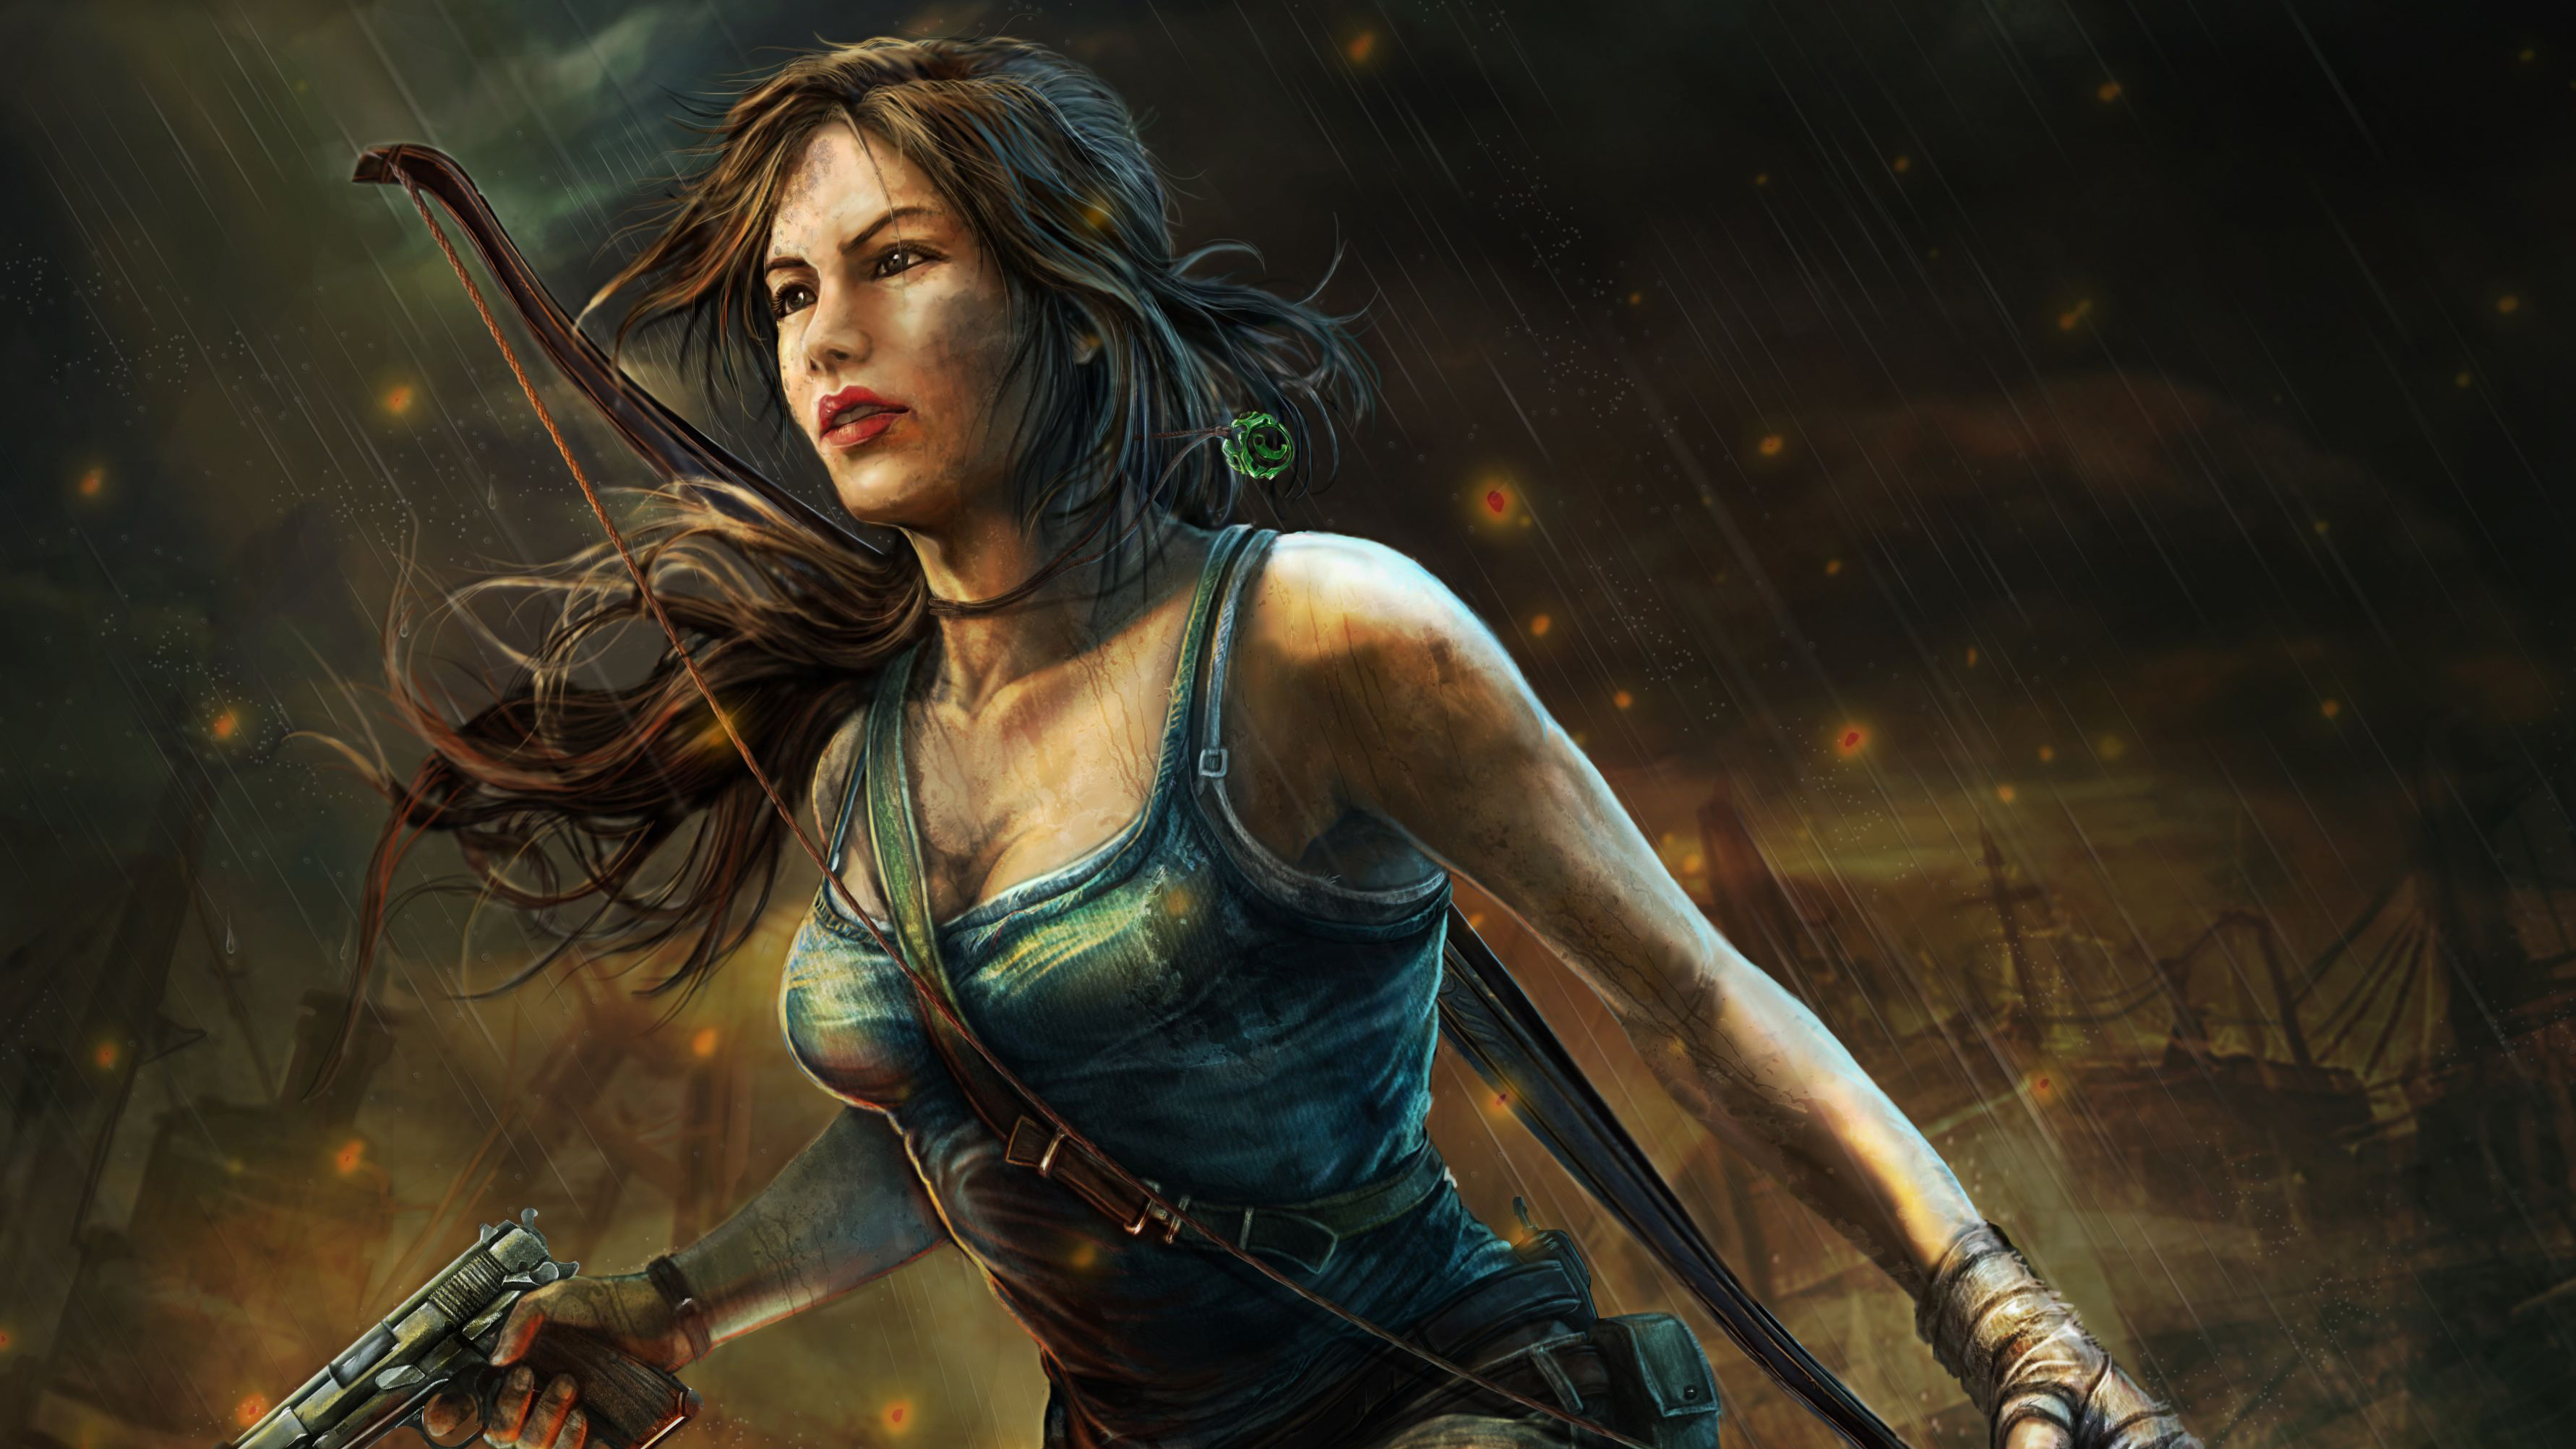 Tomb Raider K Art Hd Games K Wallpapers Images Backgrounds